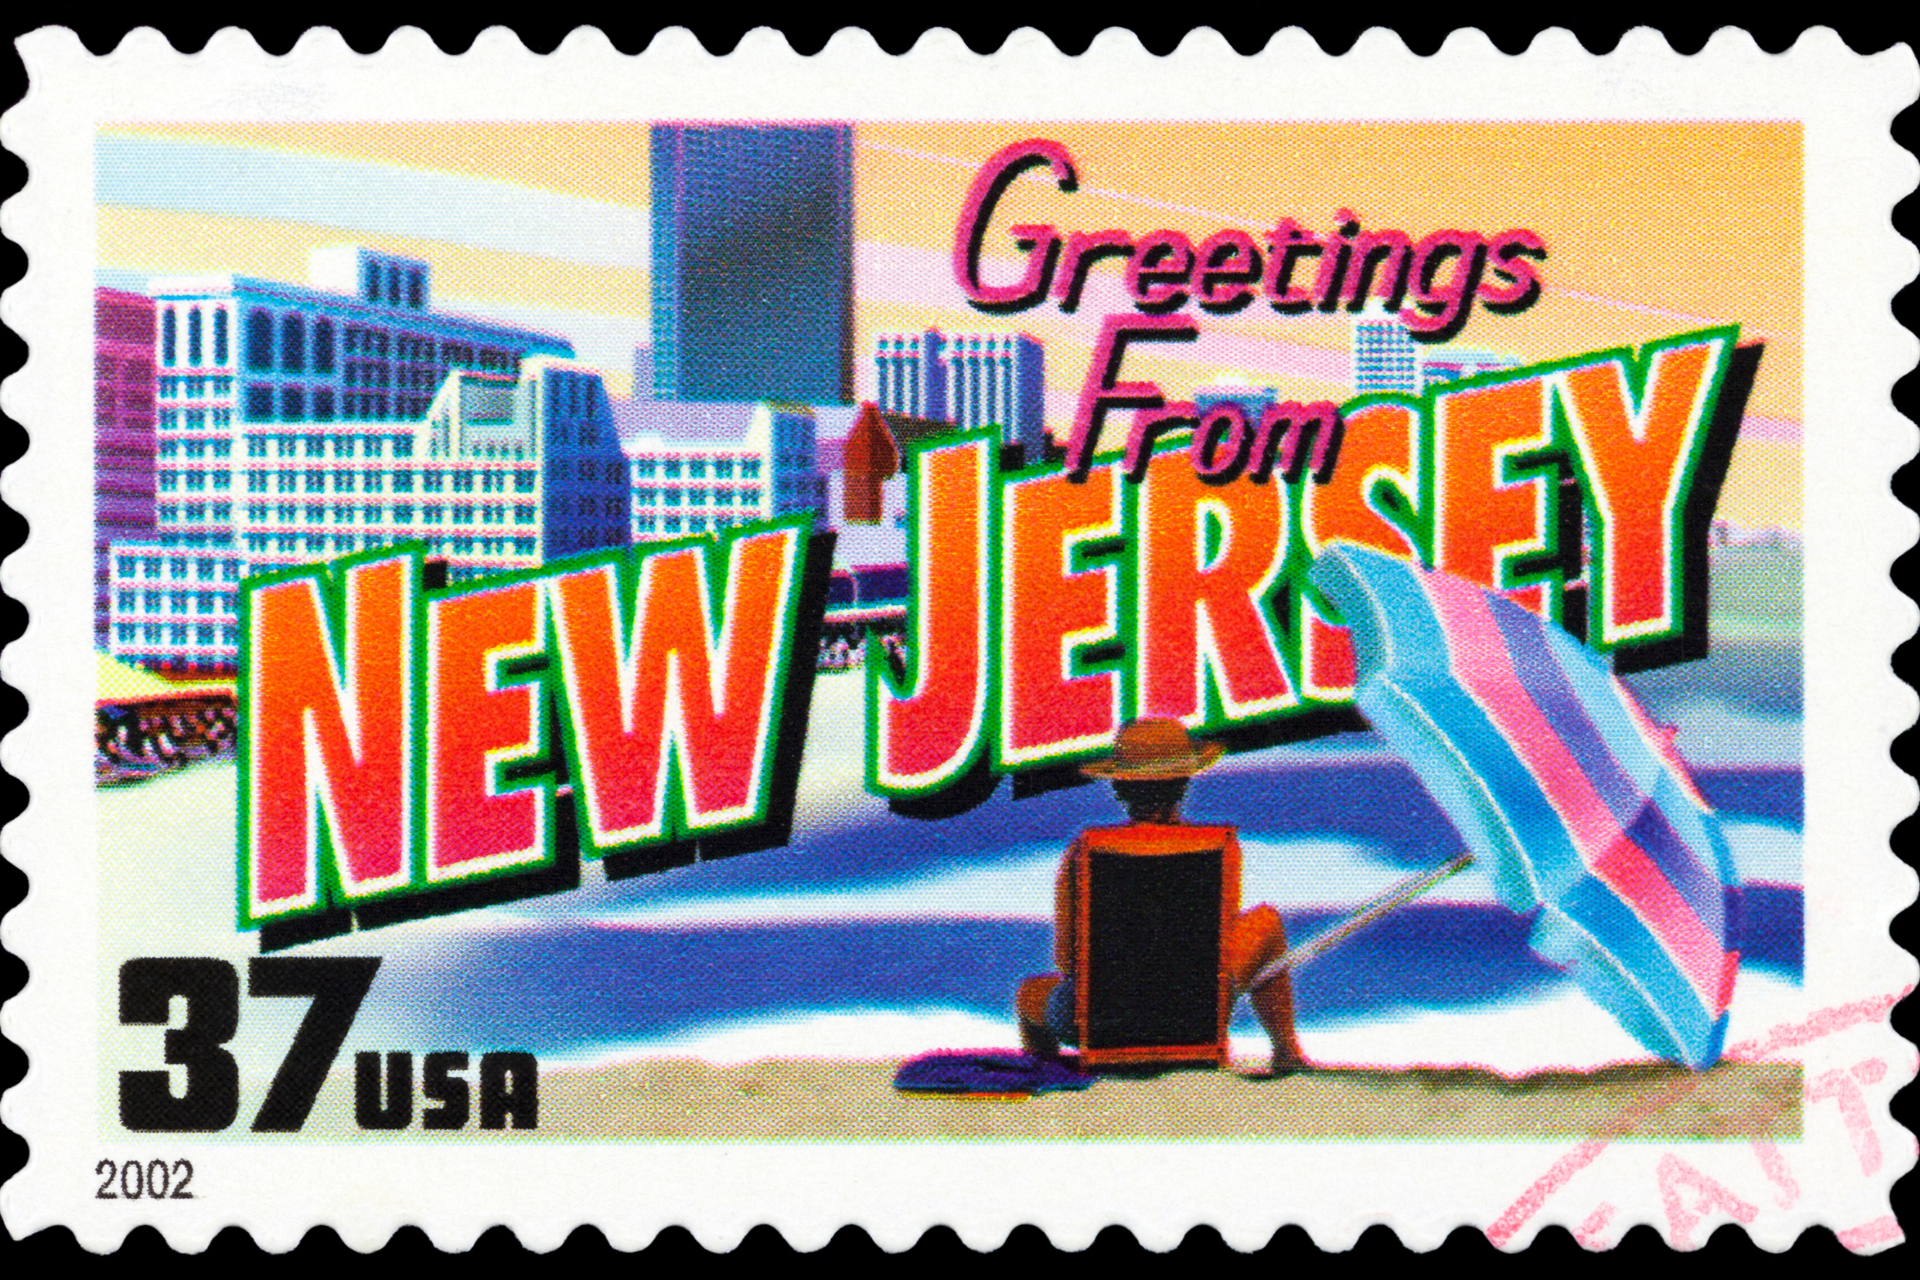 Puerto Rico and New Jersey